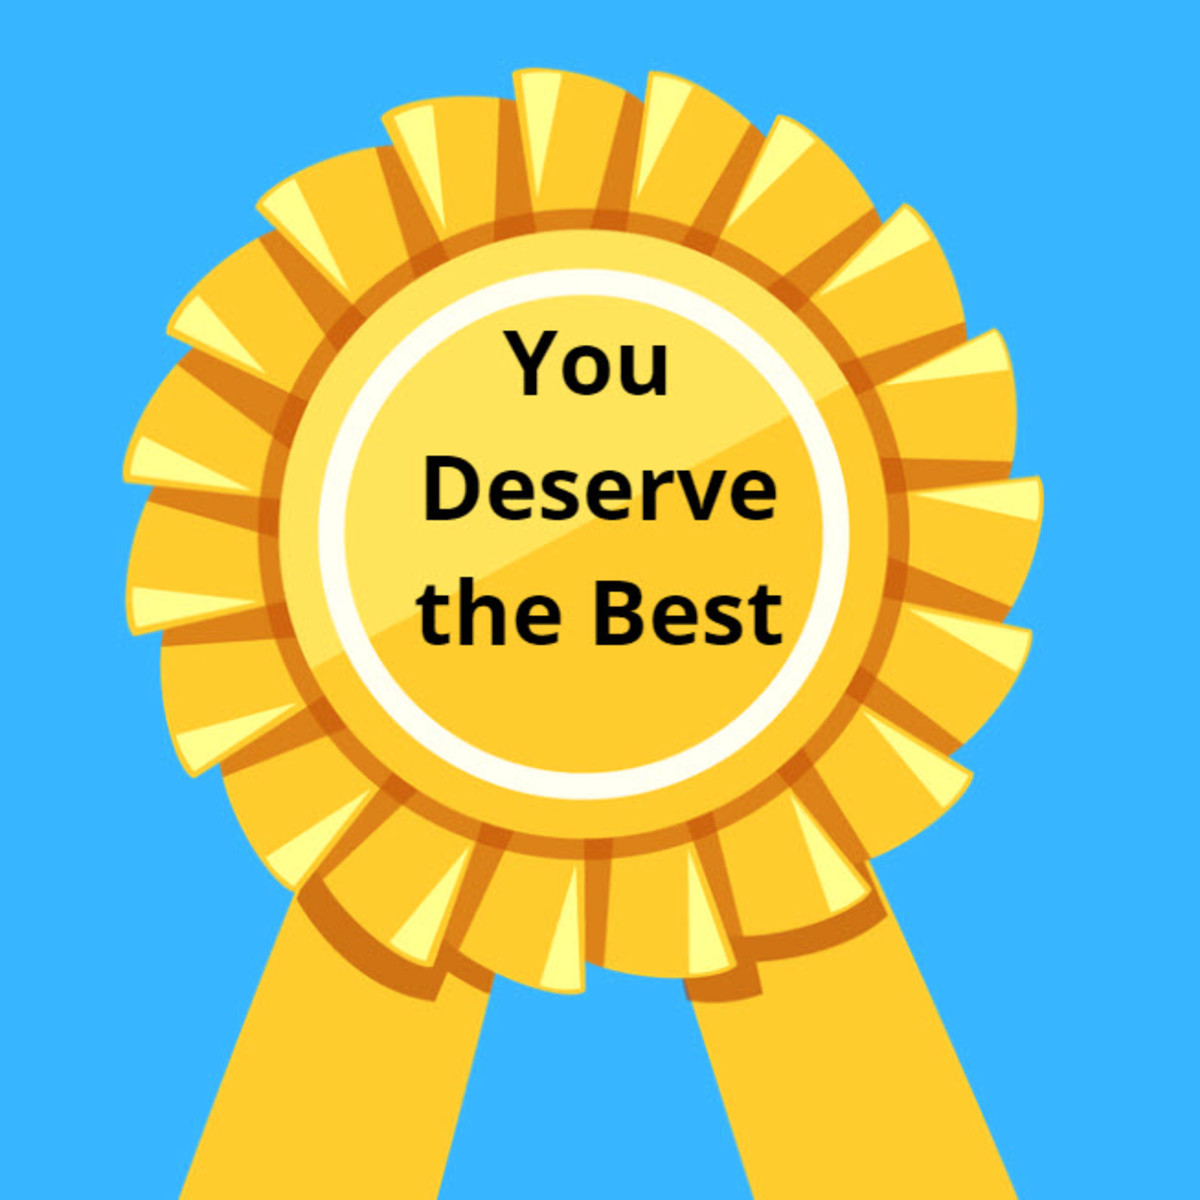 Gold award ribbon on blue background, with "You Deserve the Best" text in black